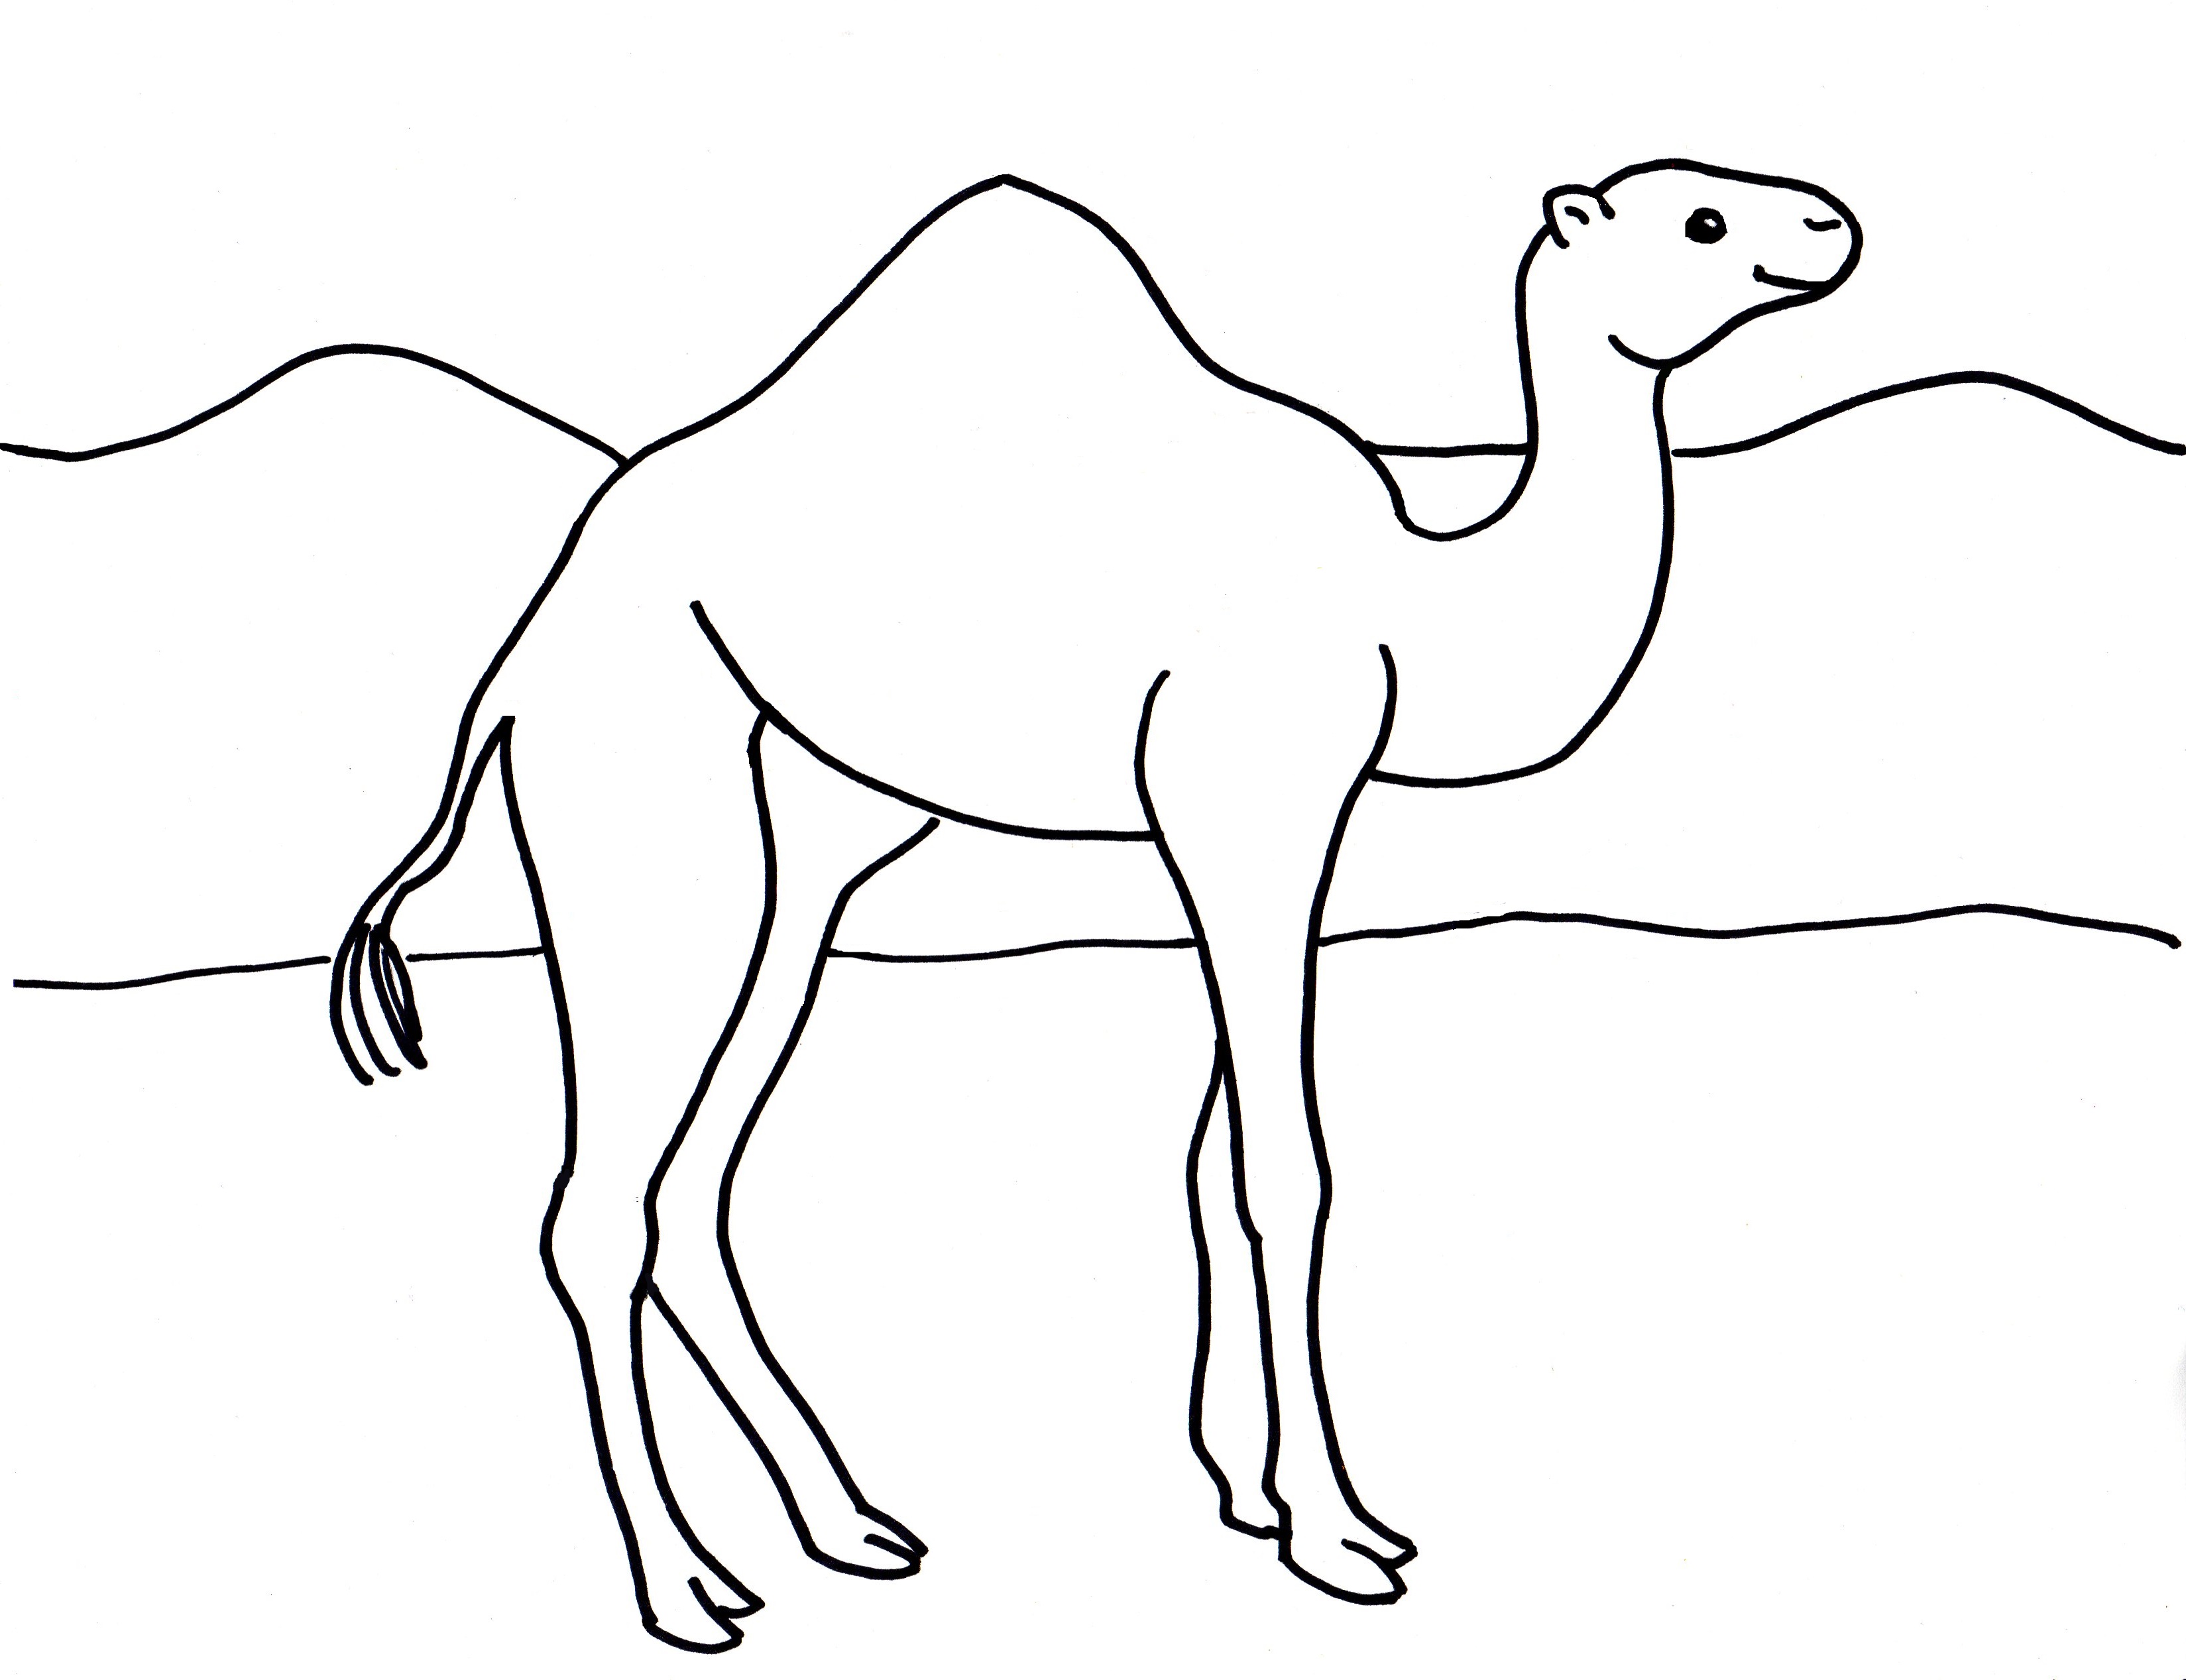 Camel Coloring Page Art Starts